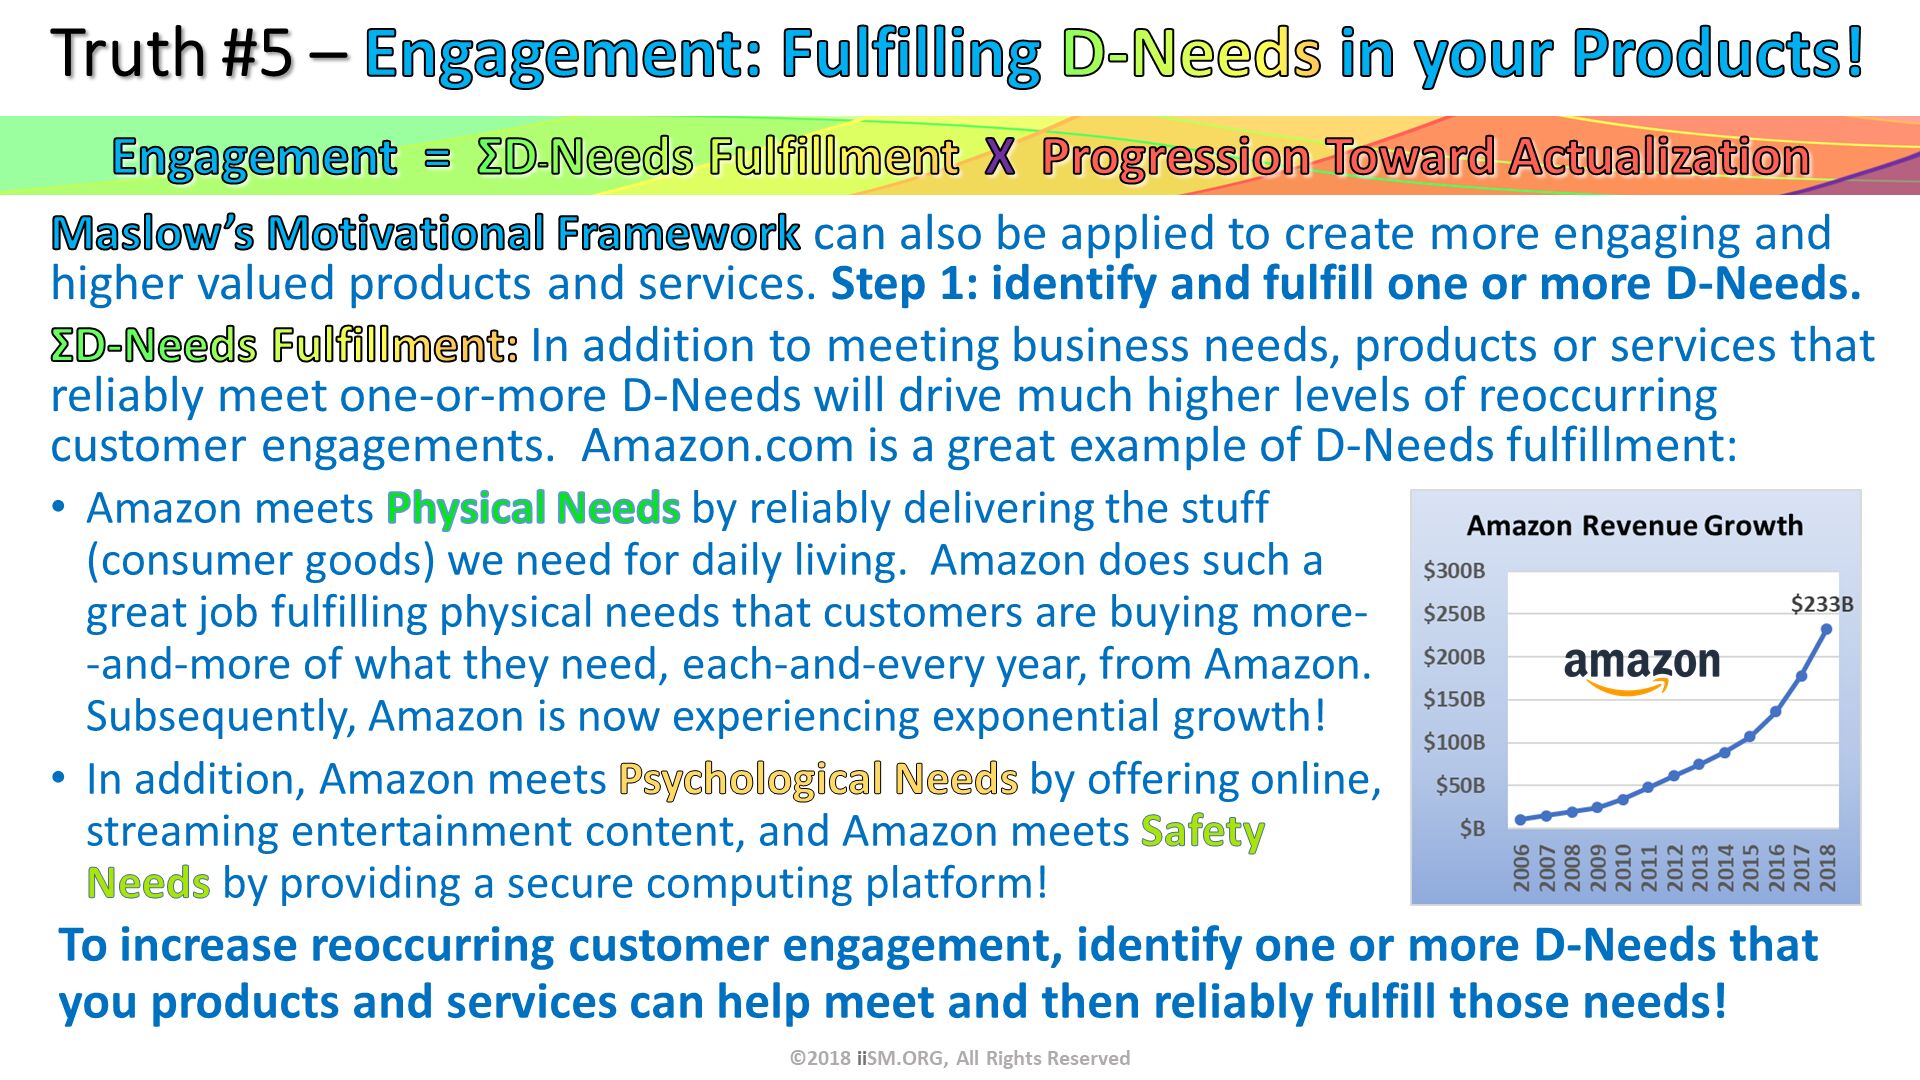 Truth #5 – Engagement: Fulfilling D-Needs in your Products! . ©2018 iiSM.ORG, All Rights Reserved. 
. Maslow’s Motivational Framework can also be applied to create more engaging and higher valued products and services. Step 1: identify and fulfill one or more D-Needs.
ΣD-Needs Fulfillment: In addition to meeting business needs, products or services that reliably meet one-or-more D-Needs will drive much higher levels of reoccurring customer engagements.  Amazon.com is a great example of D-Needs fulfillment:. Amazon meets Physical Needs by reliably delivering the stuff (consumer goods) we need for daily living.  Amazon does such a great job fulfilling physical needs that customers are buying more- -and-more of what they need, each-and-every year, from Amazon.  Subsequently, Amazon is now experiencing exponential growth! 
In addition, Amazon meets Psychological Needs by offering online, streaming entertainment content, and Amazon meets Safety Needs by providing a secure computing platform! . To increase reoccurring customer engagement, identify one or more D-Needs that you products and services can help meet and then reliably fulfill those needs!. Engagement  =  ΣD-Needs Fulfillment  X  Progression Toward Actualization. 